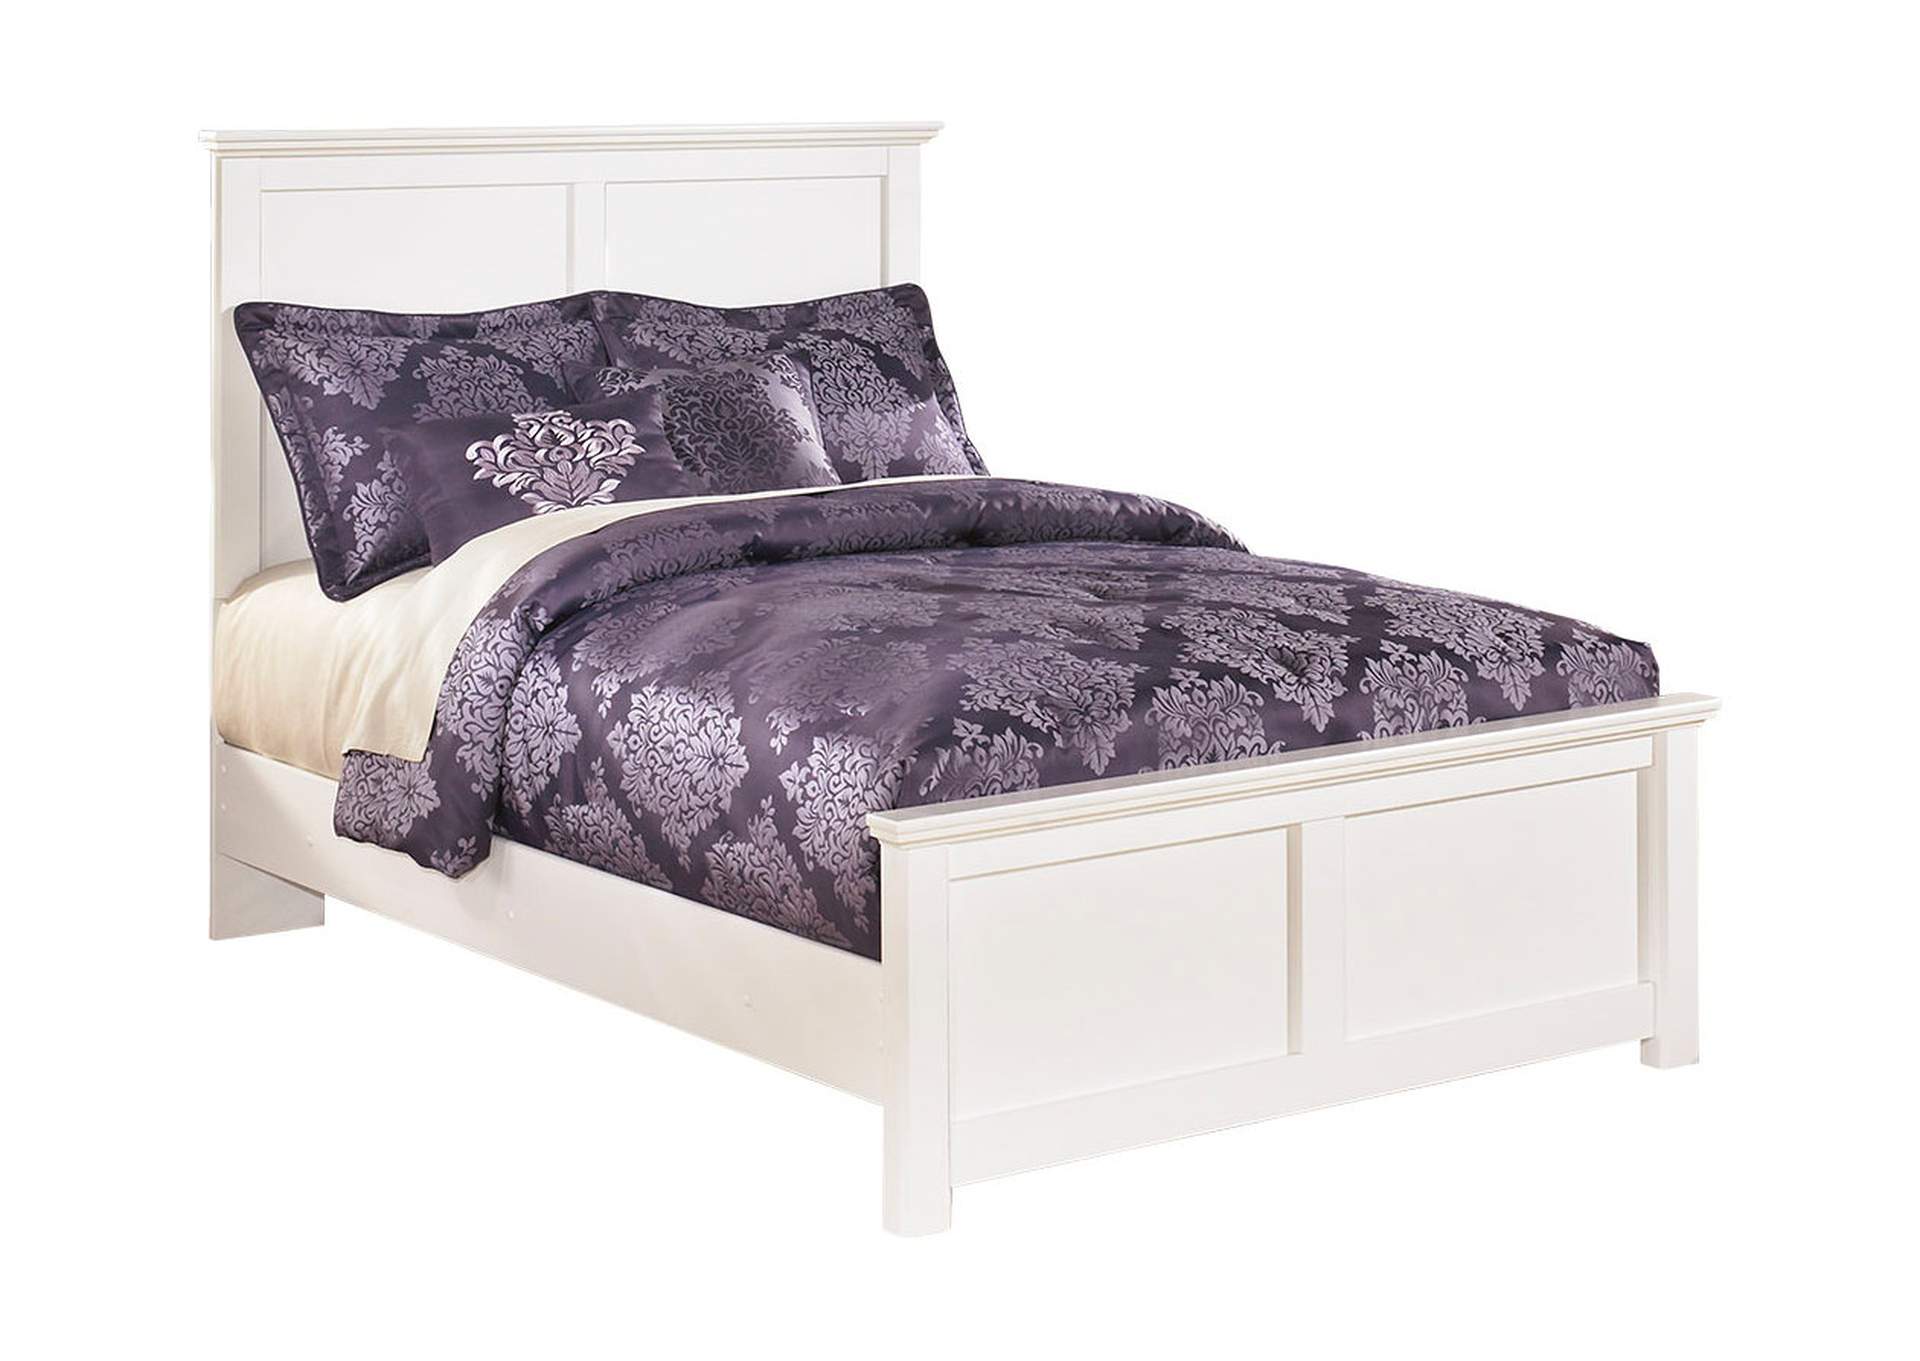 Bostwick Shoals Full Panel Bed with Dresser,Signature Design By Ashley